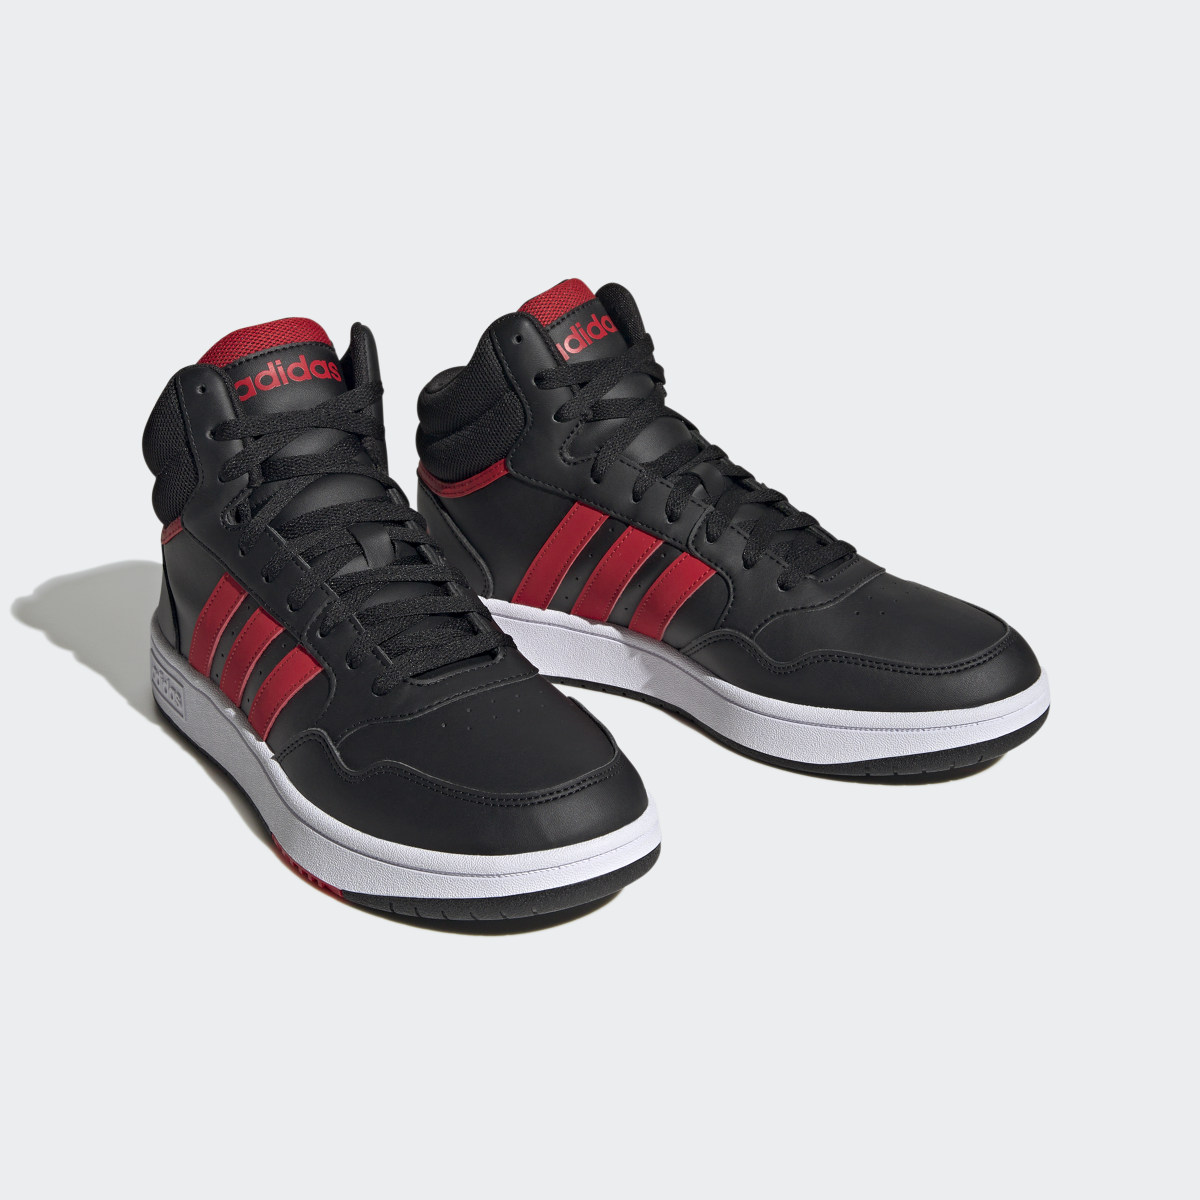 Adidas Hoops 3.0 Mid Lifestyle Basketball Classic Vintage Shoes. 5